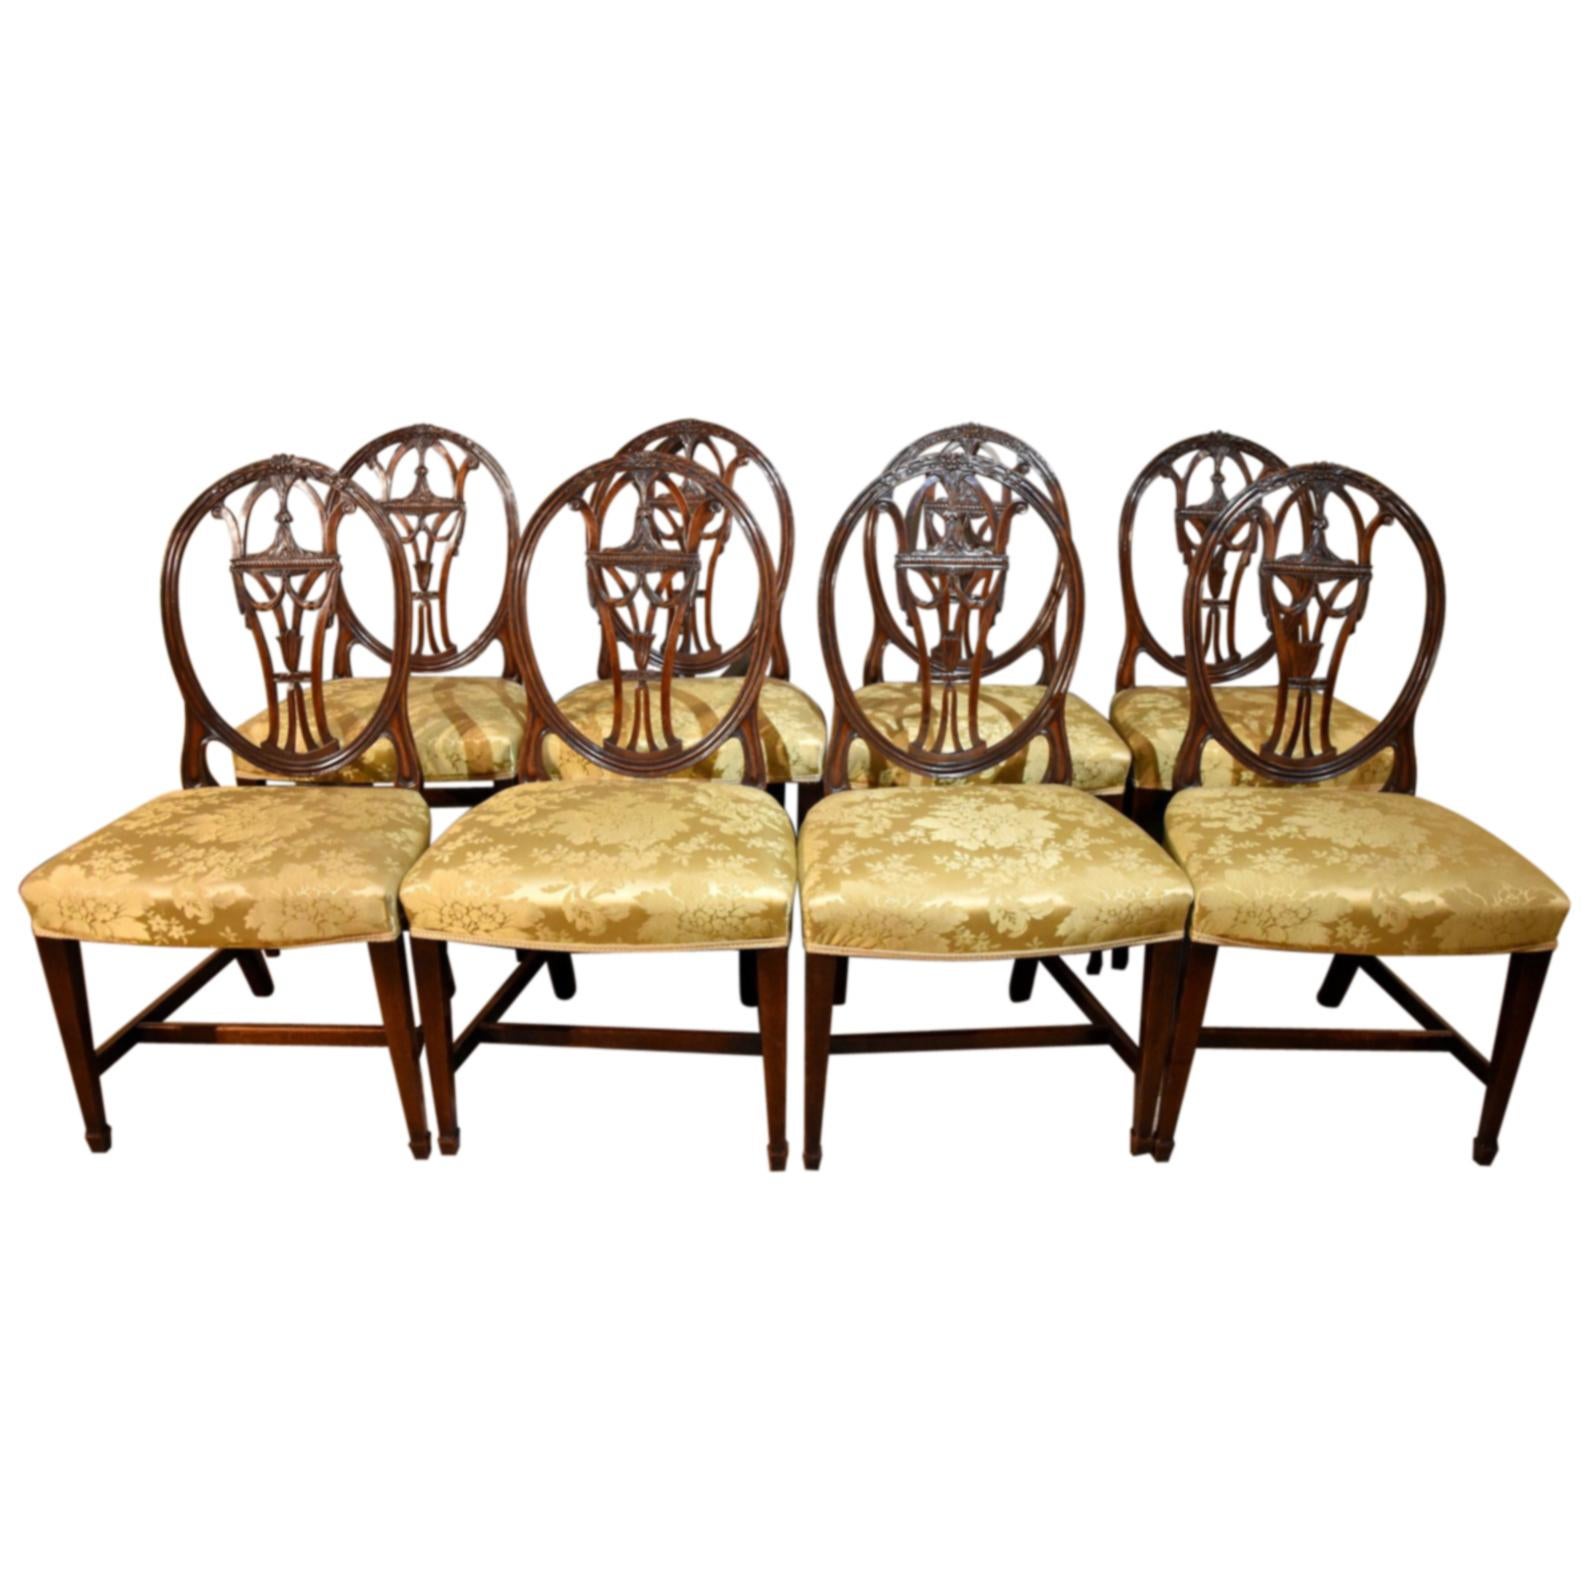 Very Fine Set of Eight Late 18th Century Hepplewhite Dining Chairs